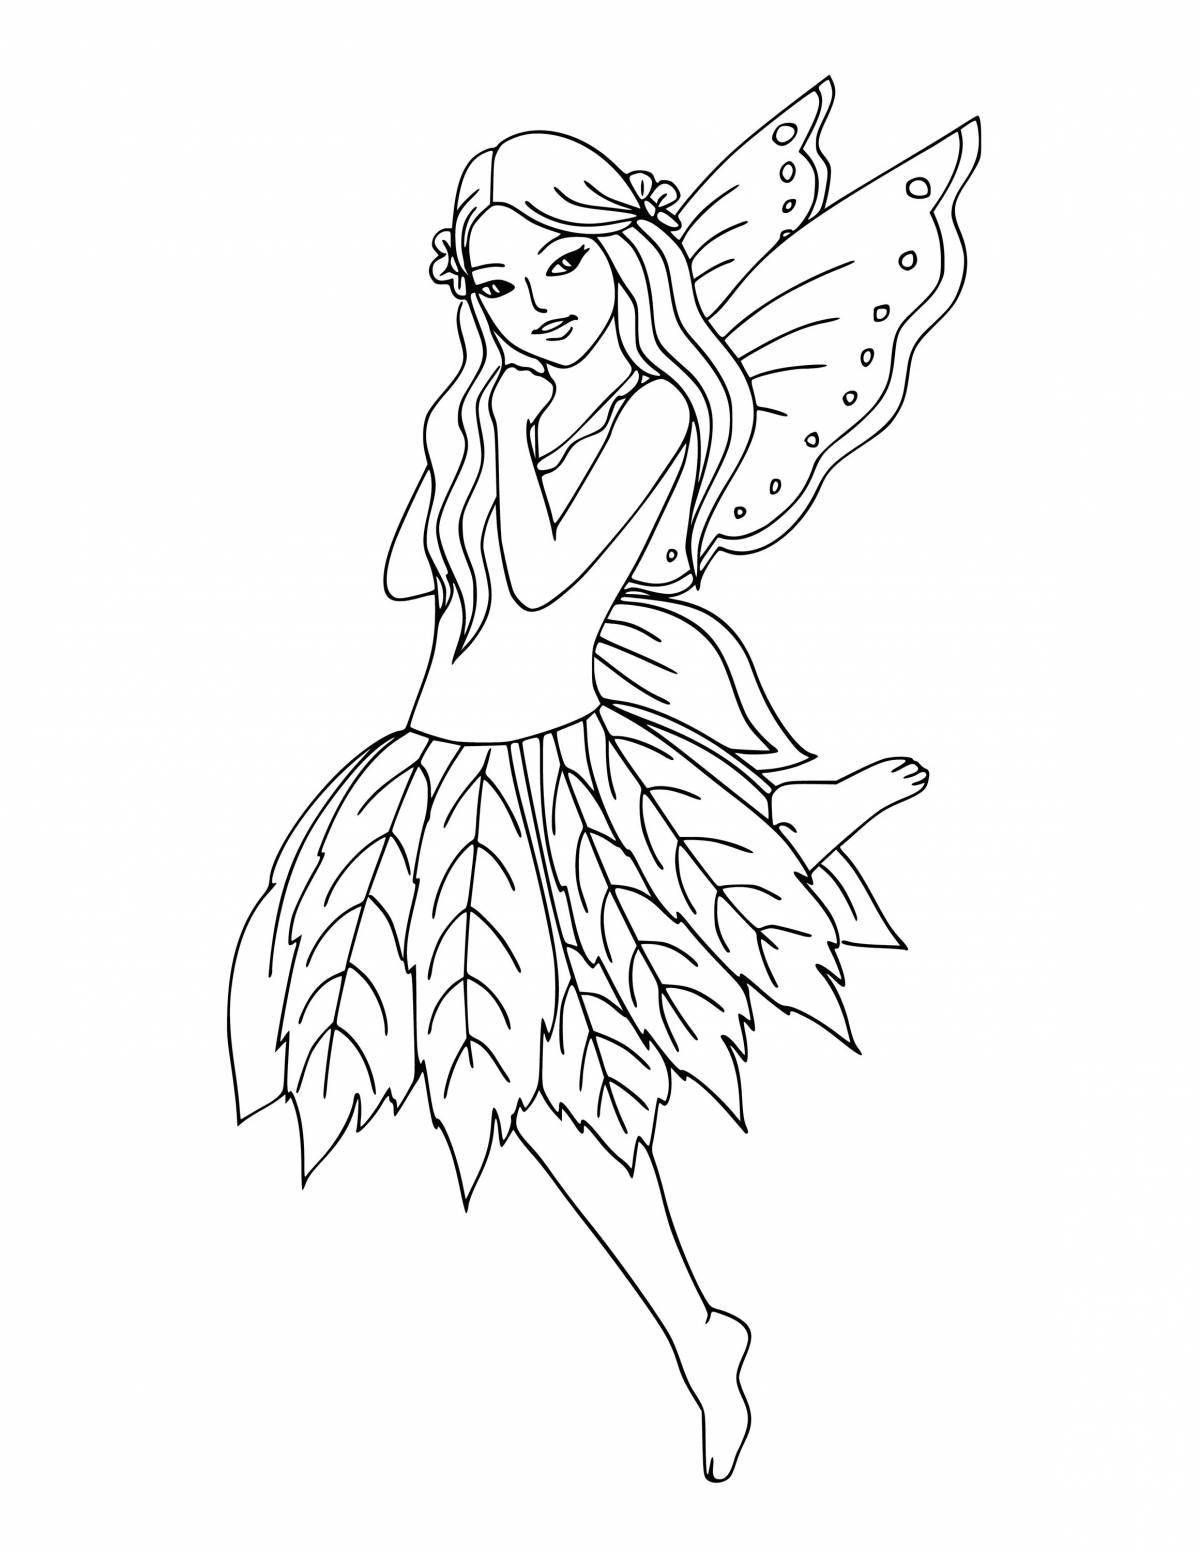 Inviting fairy coloring pages for kids 5-6 years old